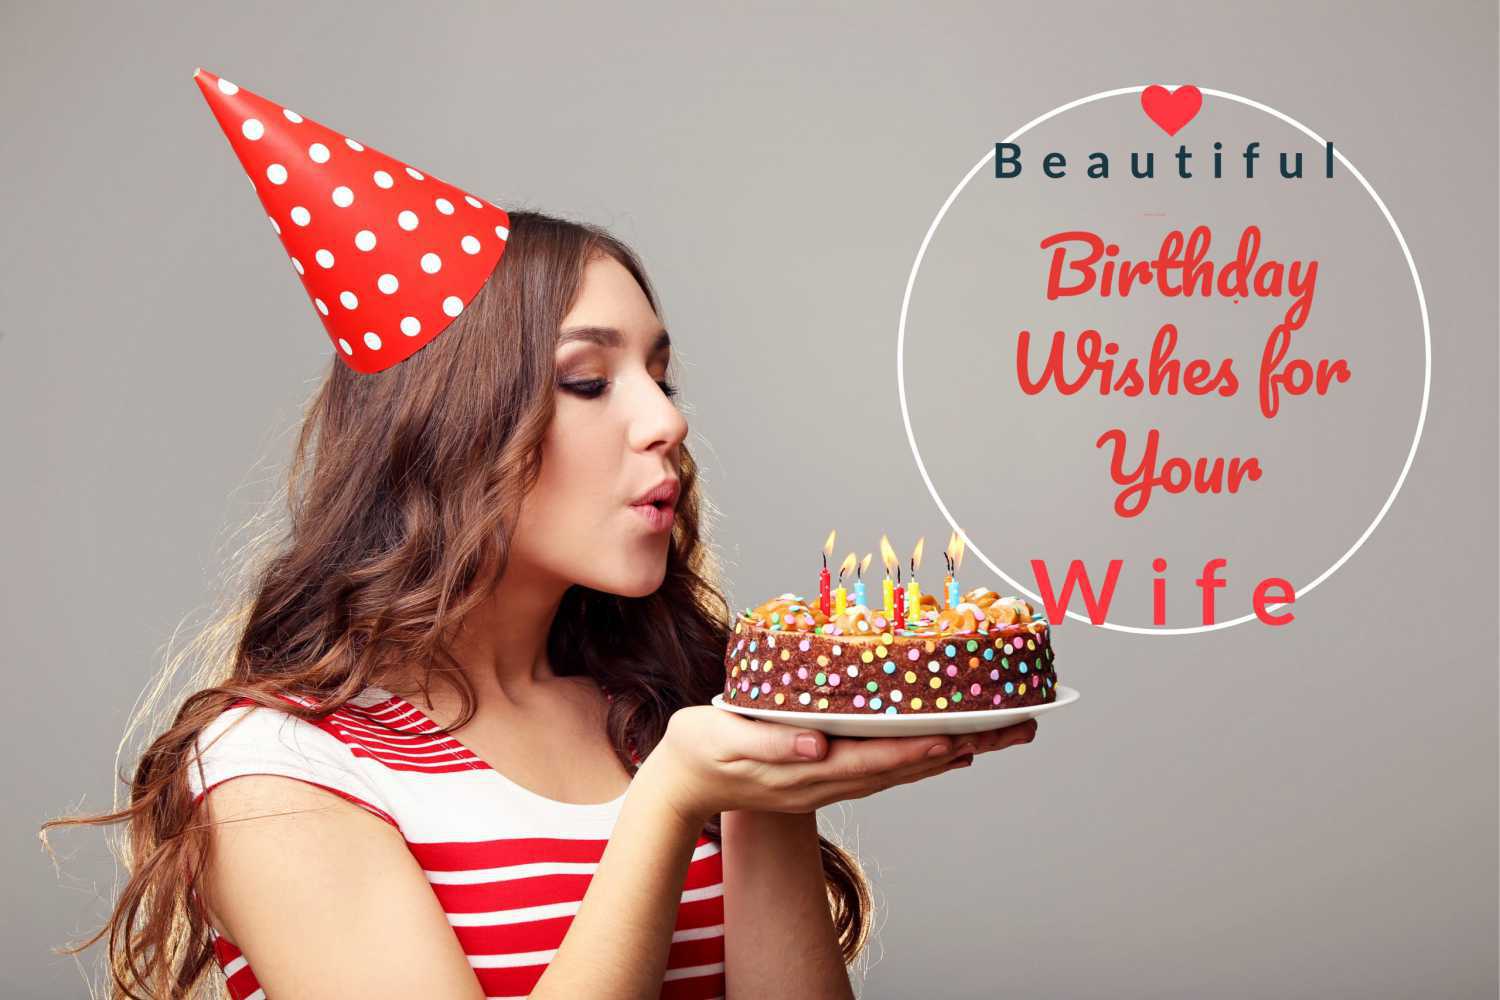 birthday wishes for wife